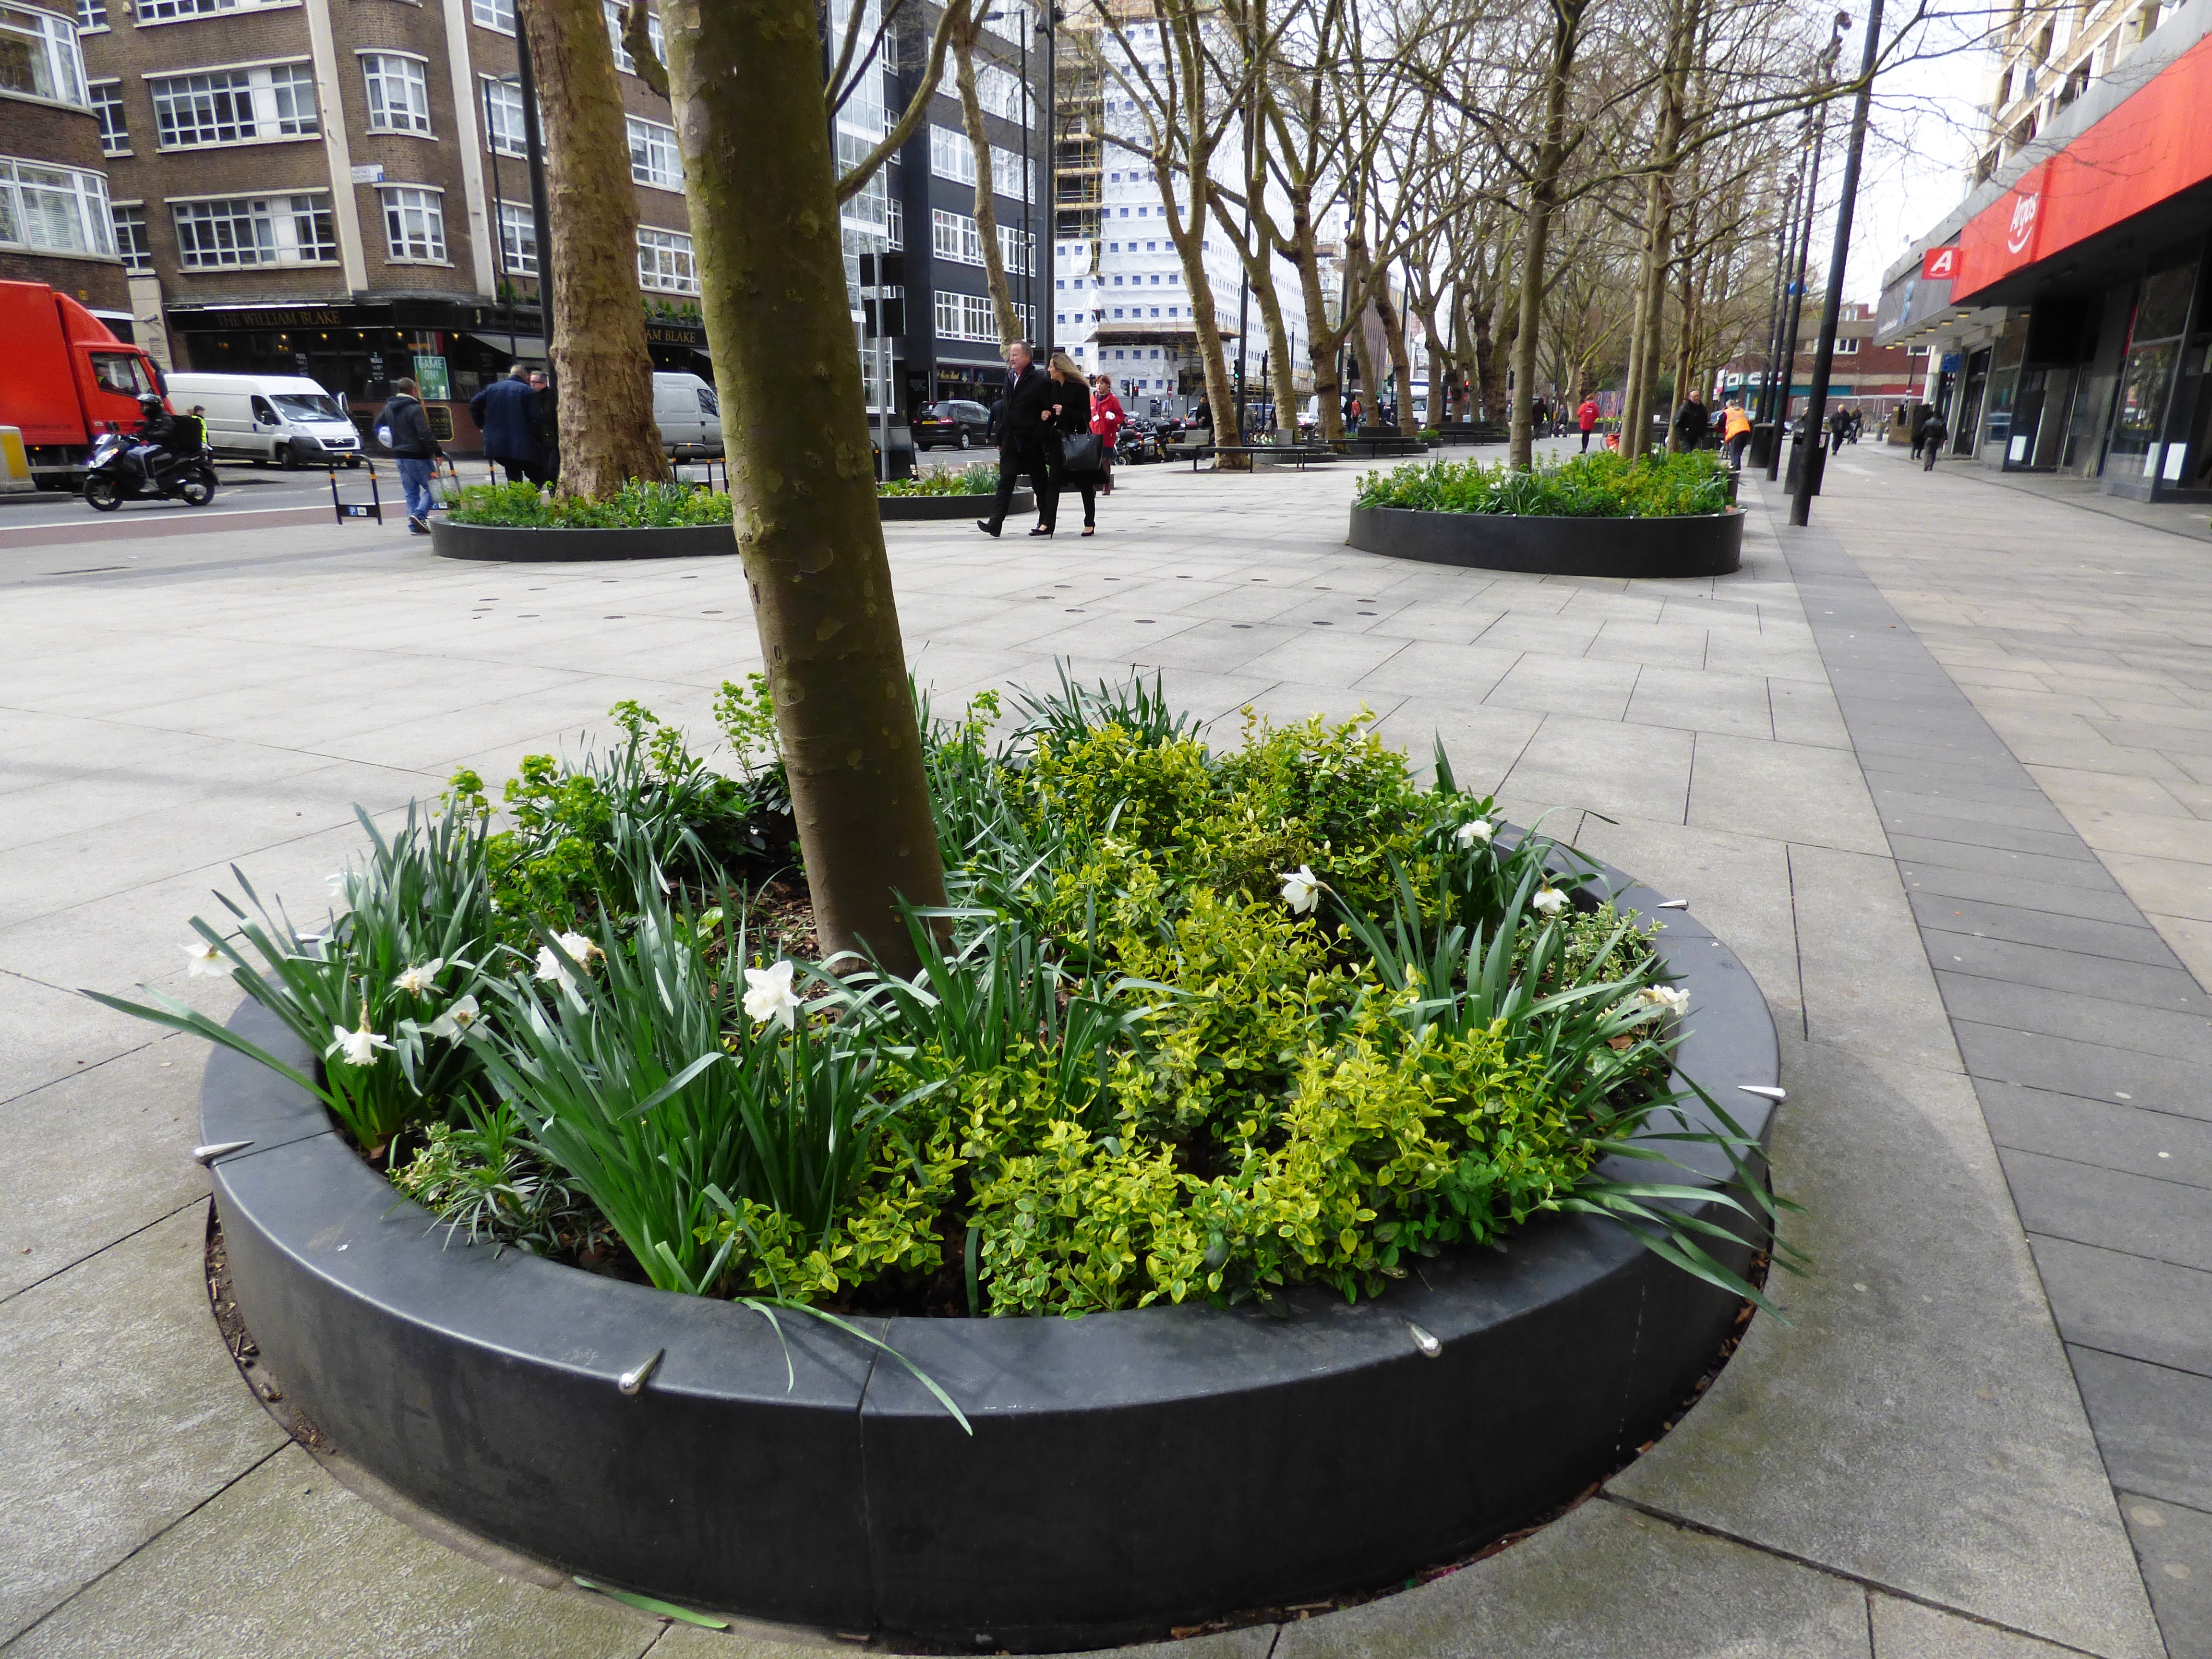 20170323_Islington_Old-Street_Bowls-of-Green-Space